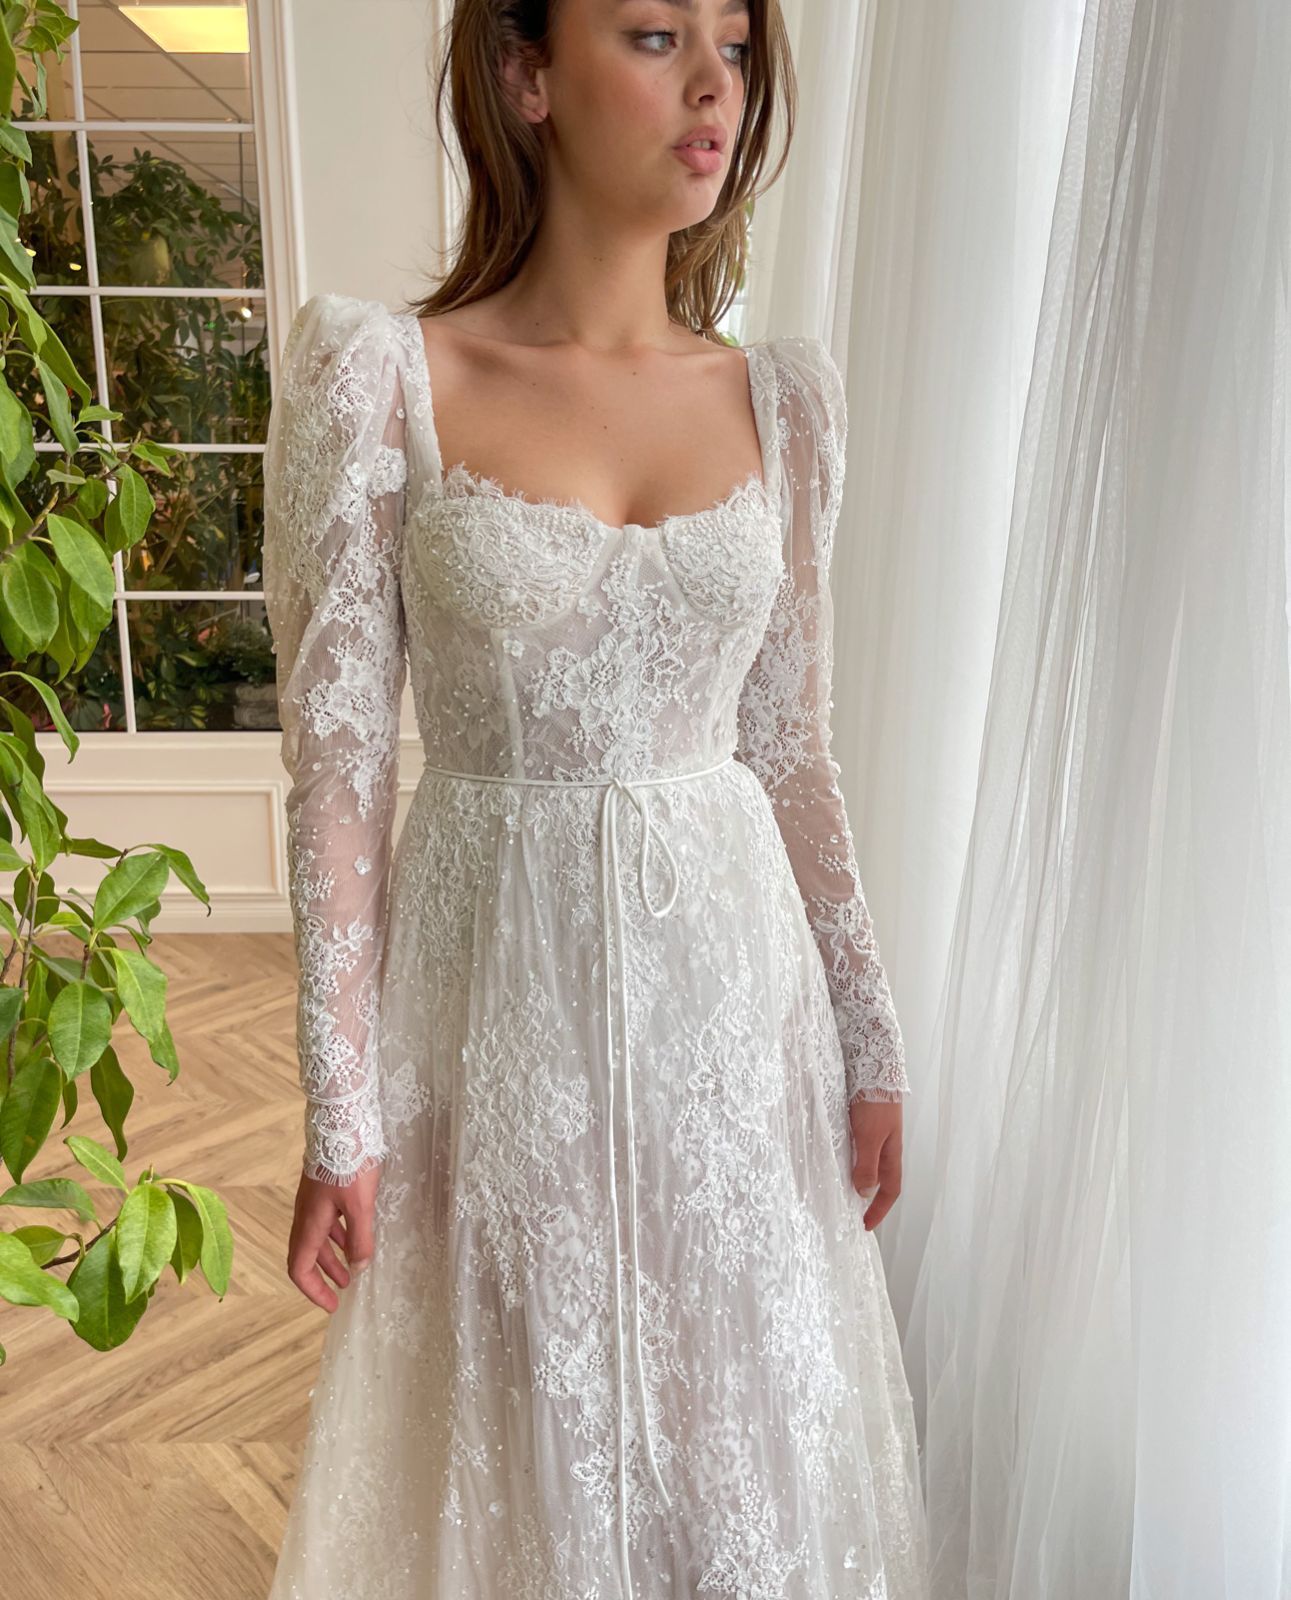 White A-Line bridal dress with long sleeves, lace and embroidery